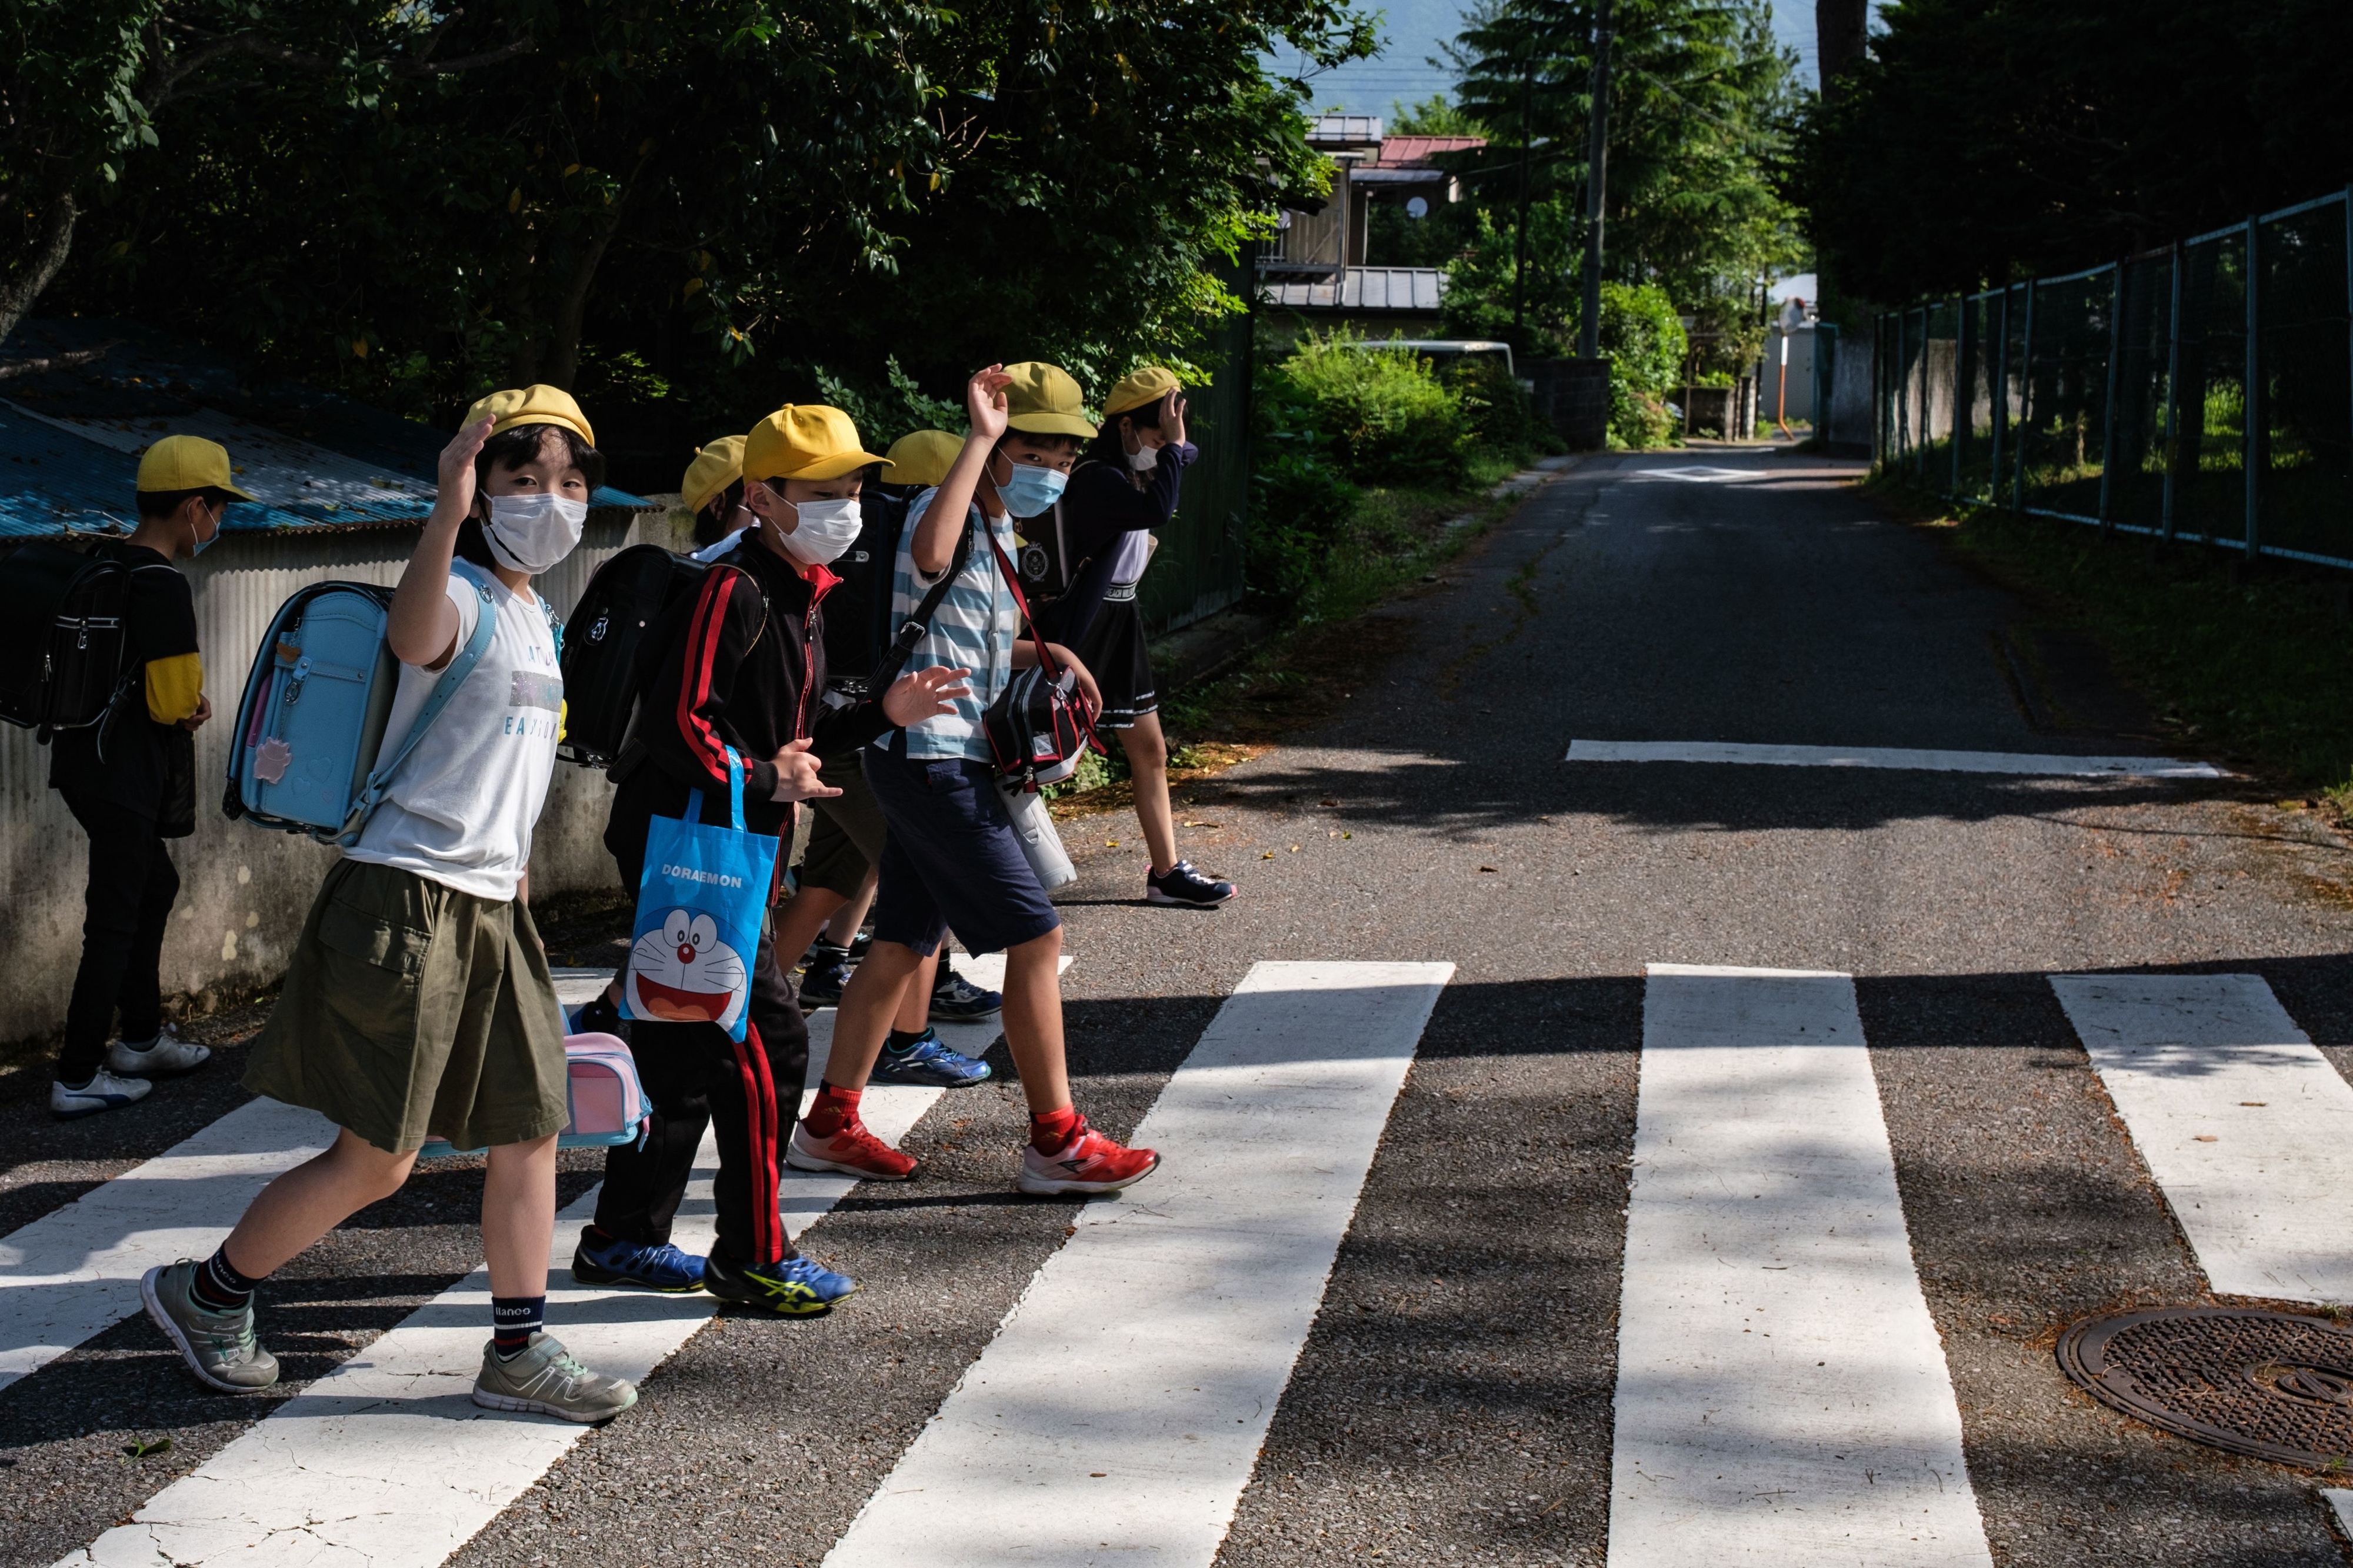 Group of schoolchildren with masks crossing the street safely at a pedestrian crosswalk